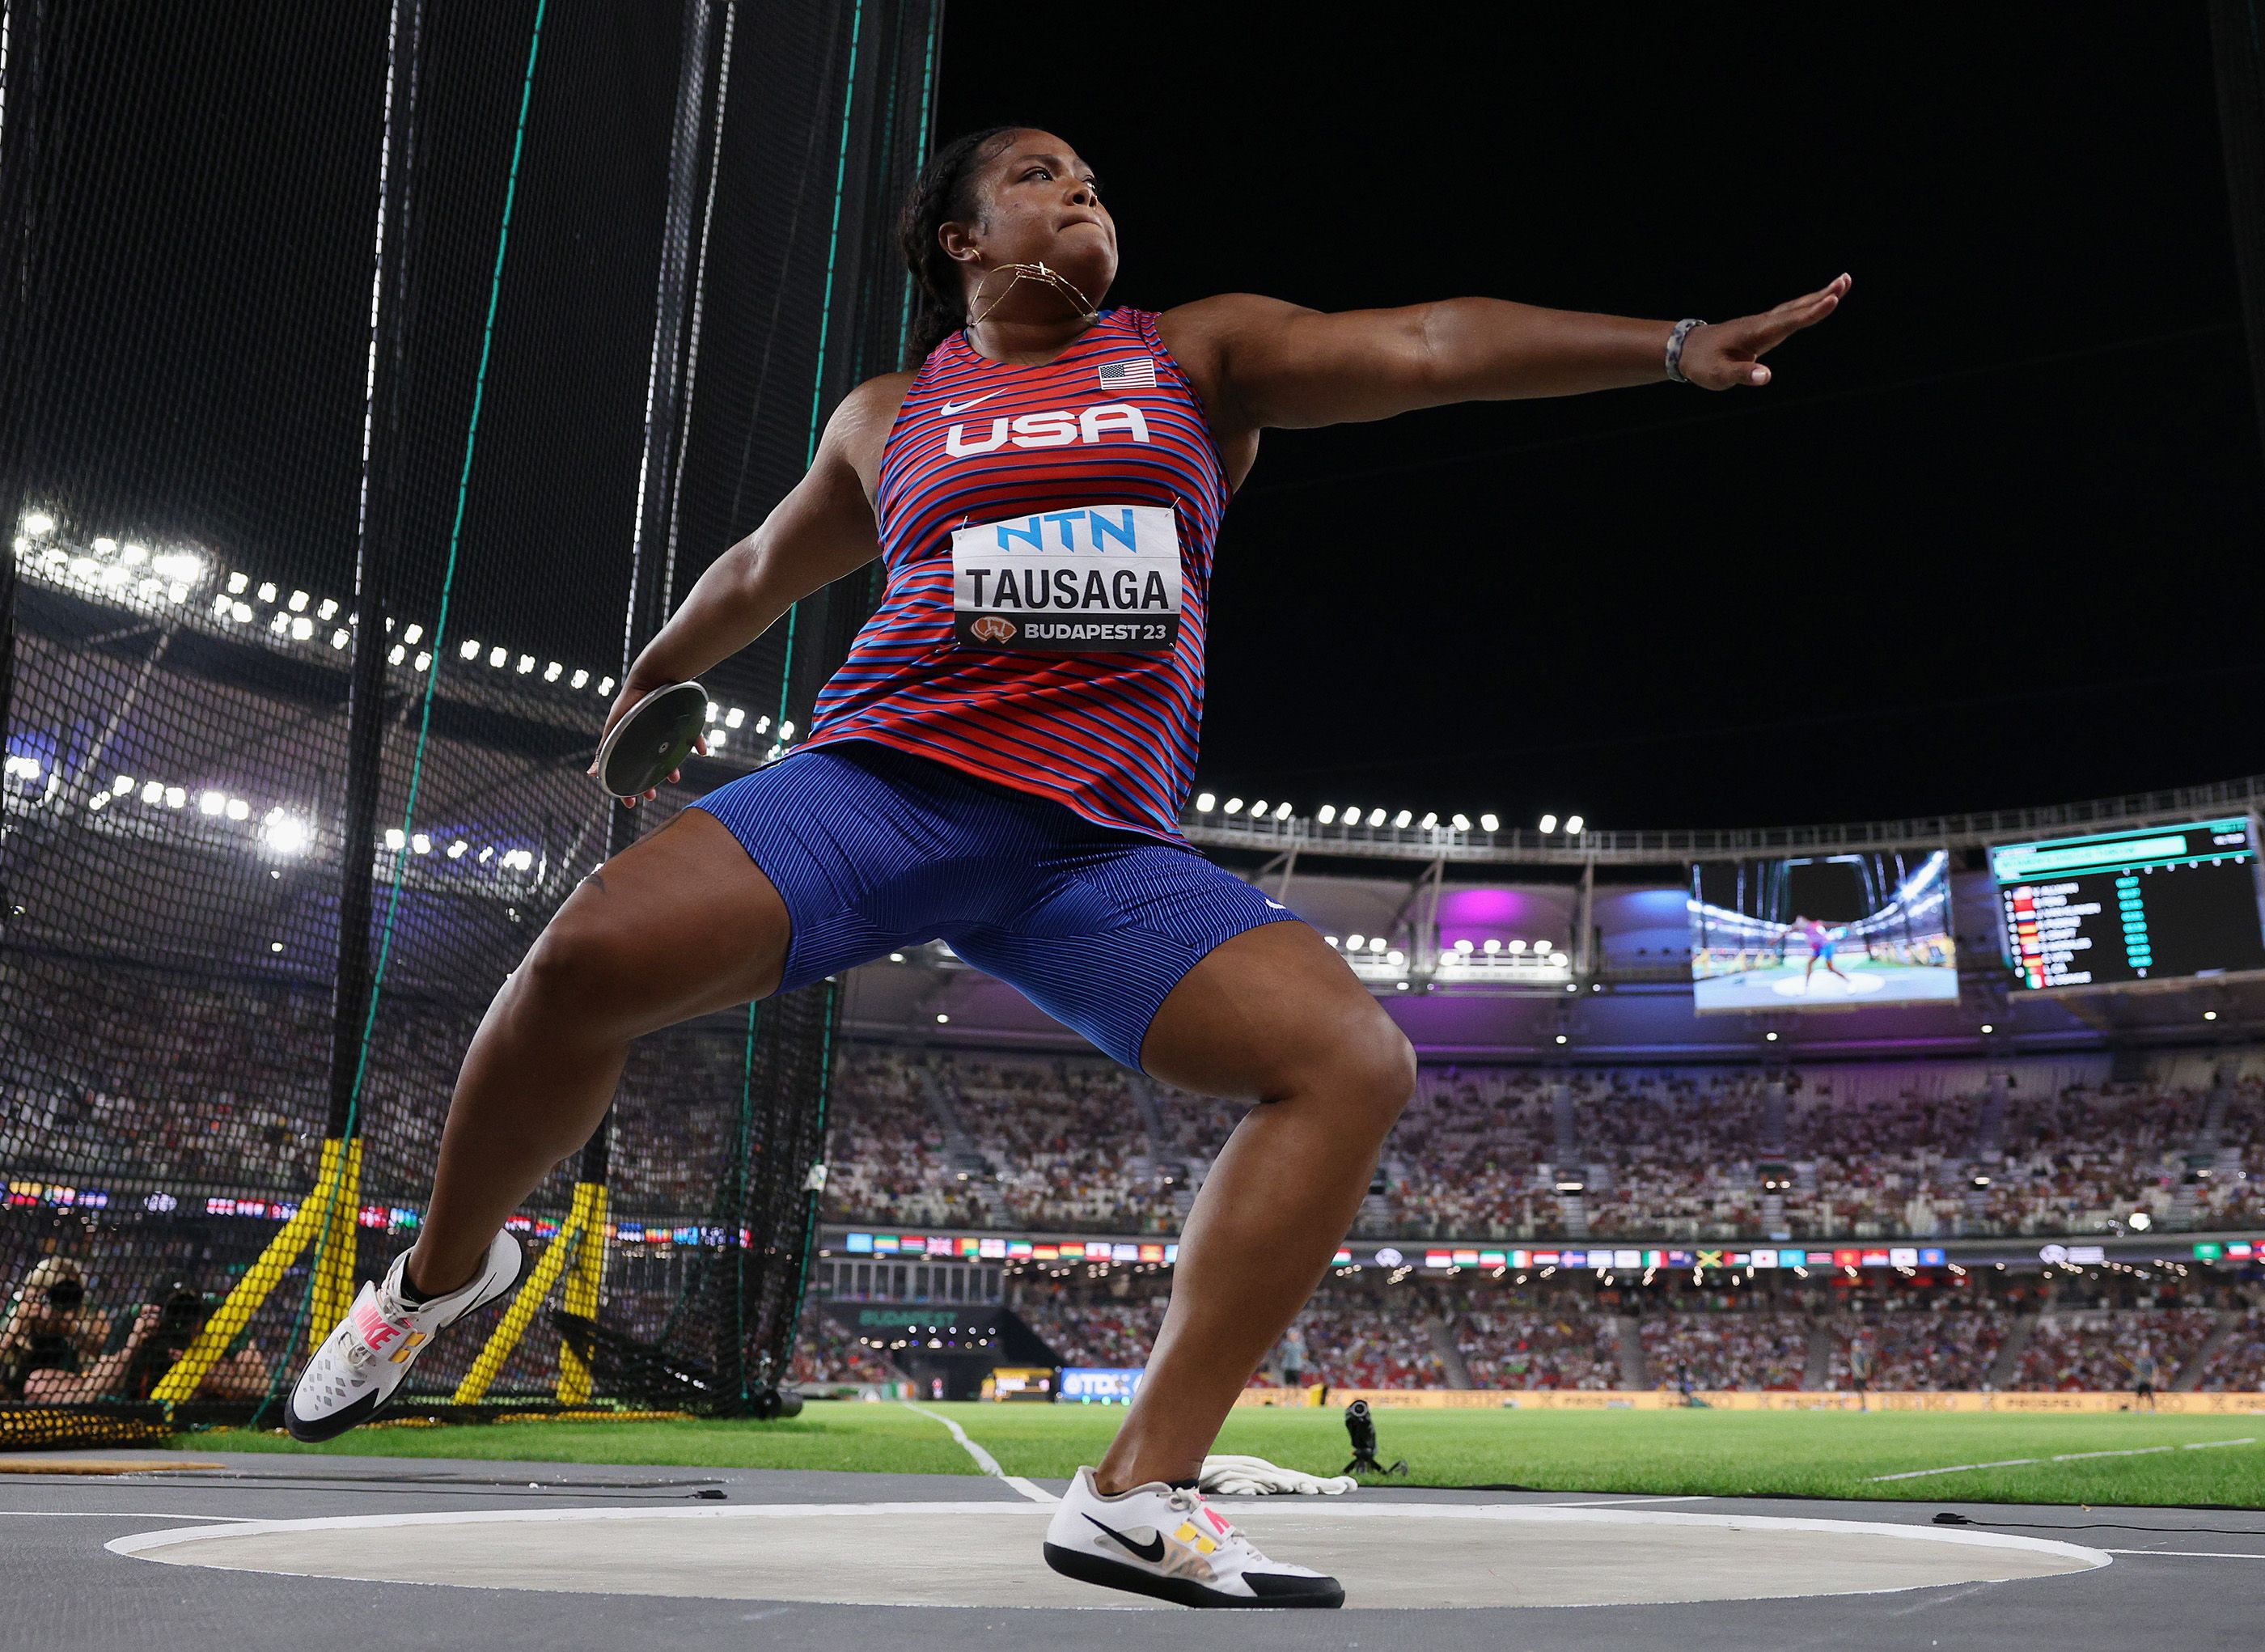 Laulauga Tausaga in the discus final at the World Athletics Championships Budapest 23